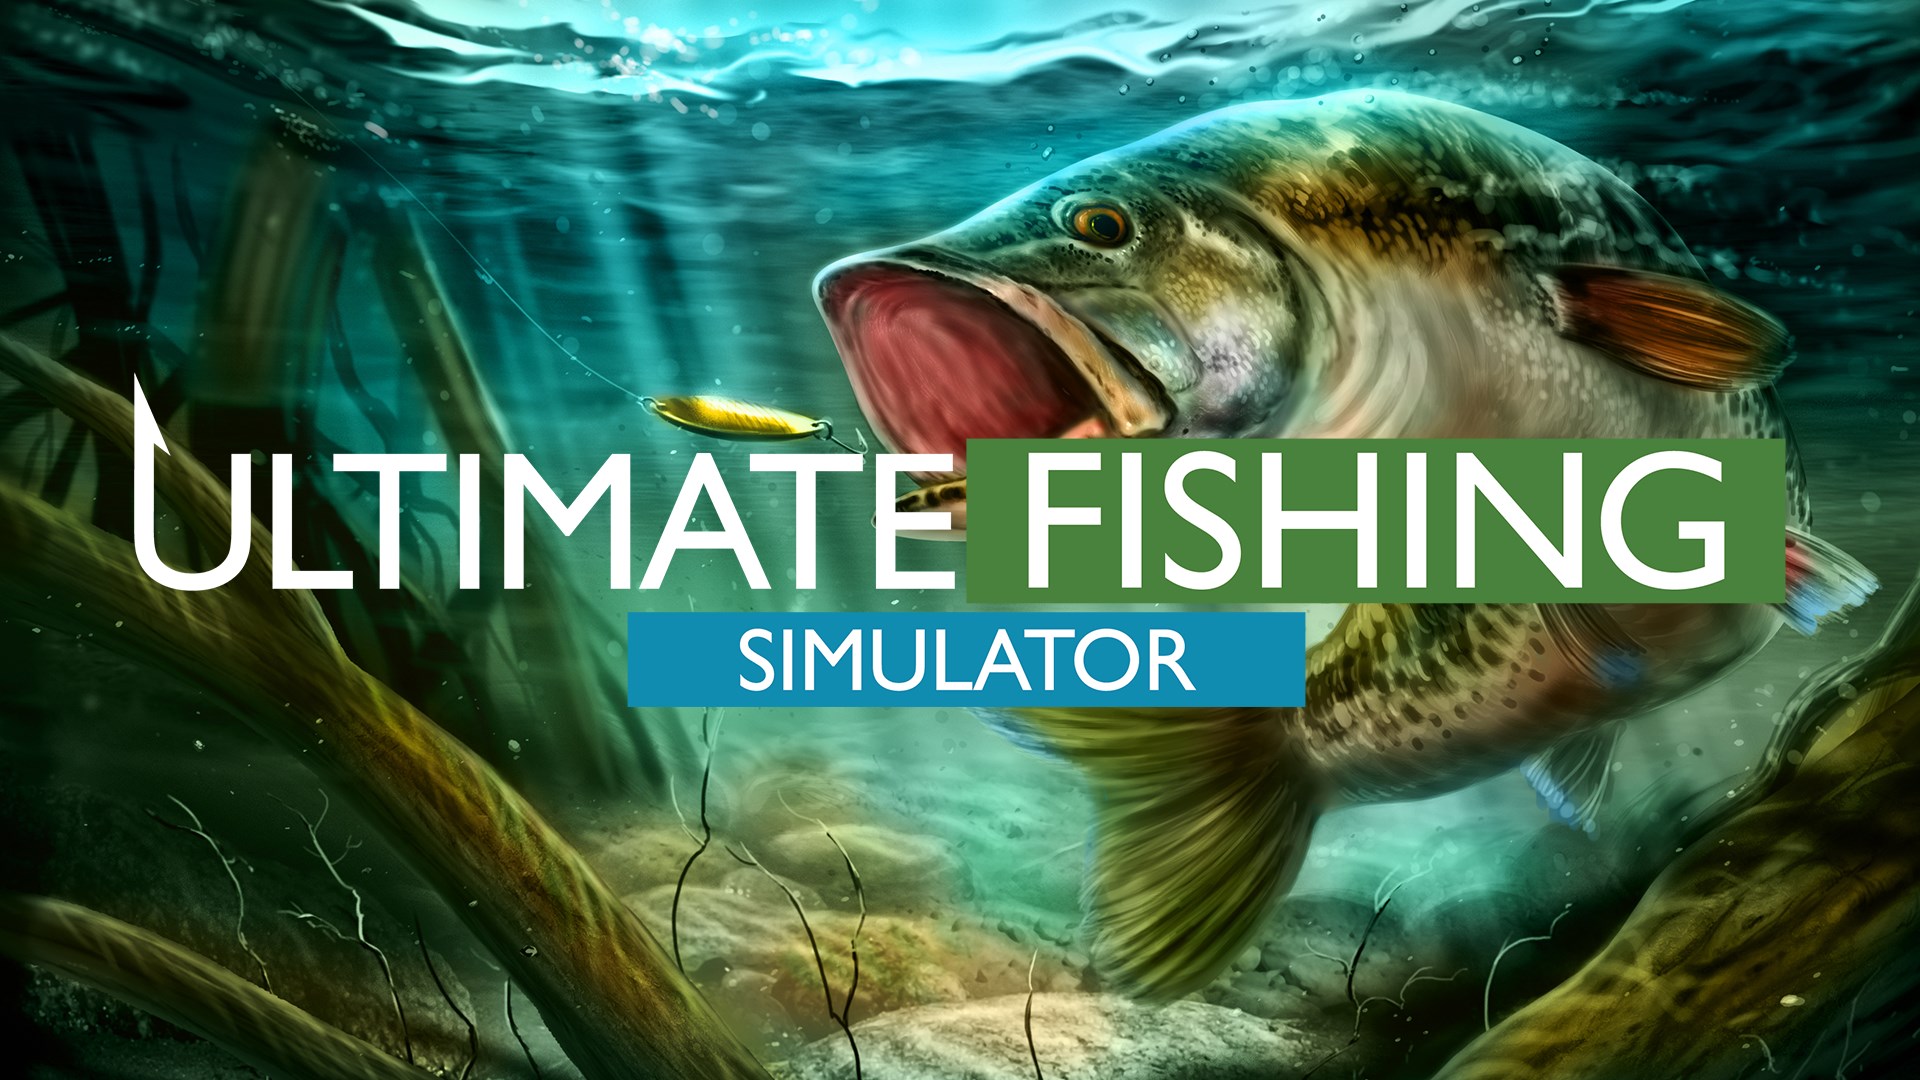  Pro Fishing Simulator Microsoft Xbox One Game for sale online